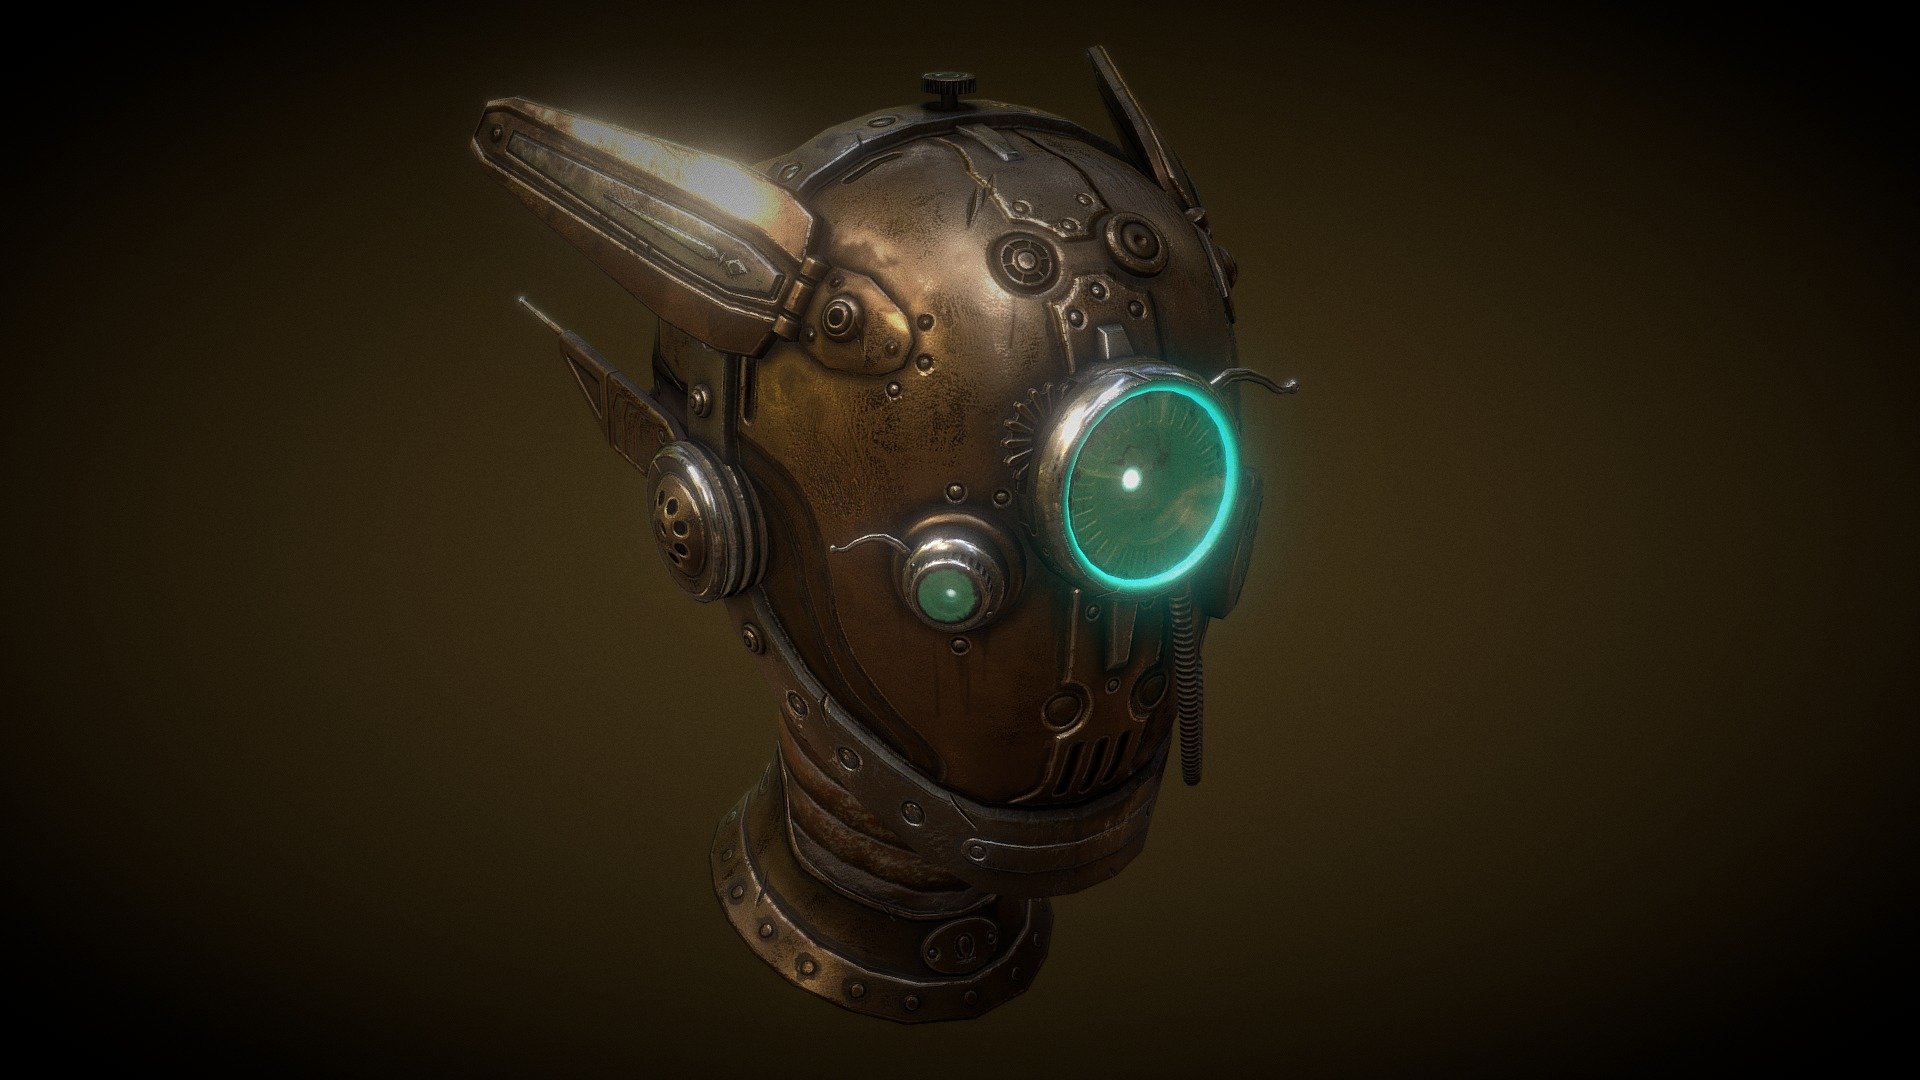 A tech marvel of the SteamTech Era: 
The Tactical Casque worn by Omega Assassins, 
a special ghost unit of the High Prism faction.
Grands the wearer exceptional detection and aiming abilities.

(An old steampunk helmet concept, initially created in Zbrush, 
that i decided to rework)

Software used:
ZBrush, Maya, Substance Painter, Photoshop - Ωmega Casque - 3D model by Réplhka (@replhka) 3d model